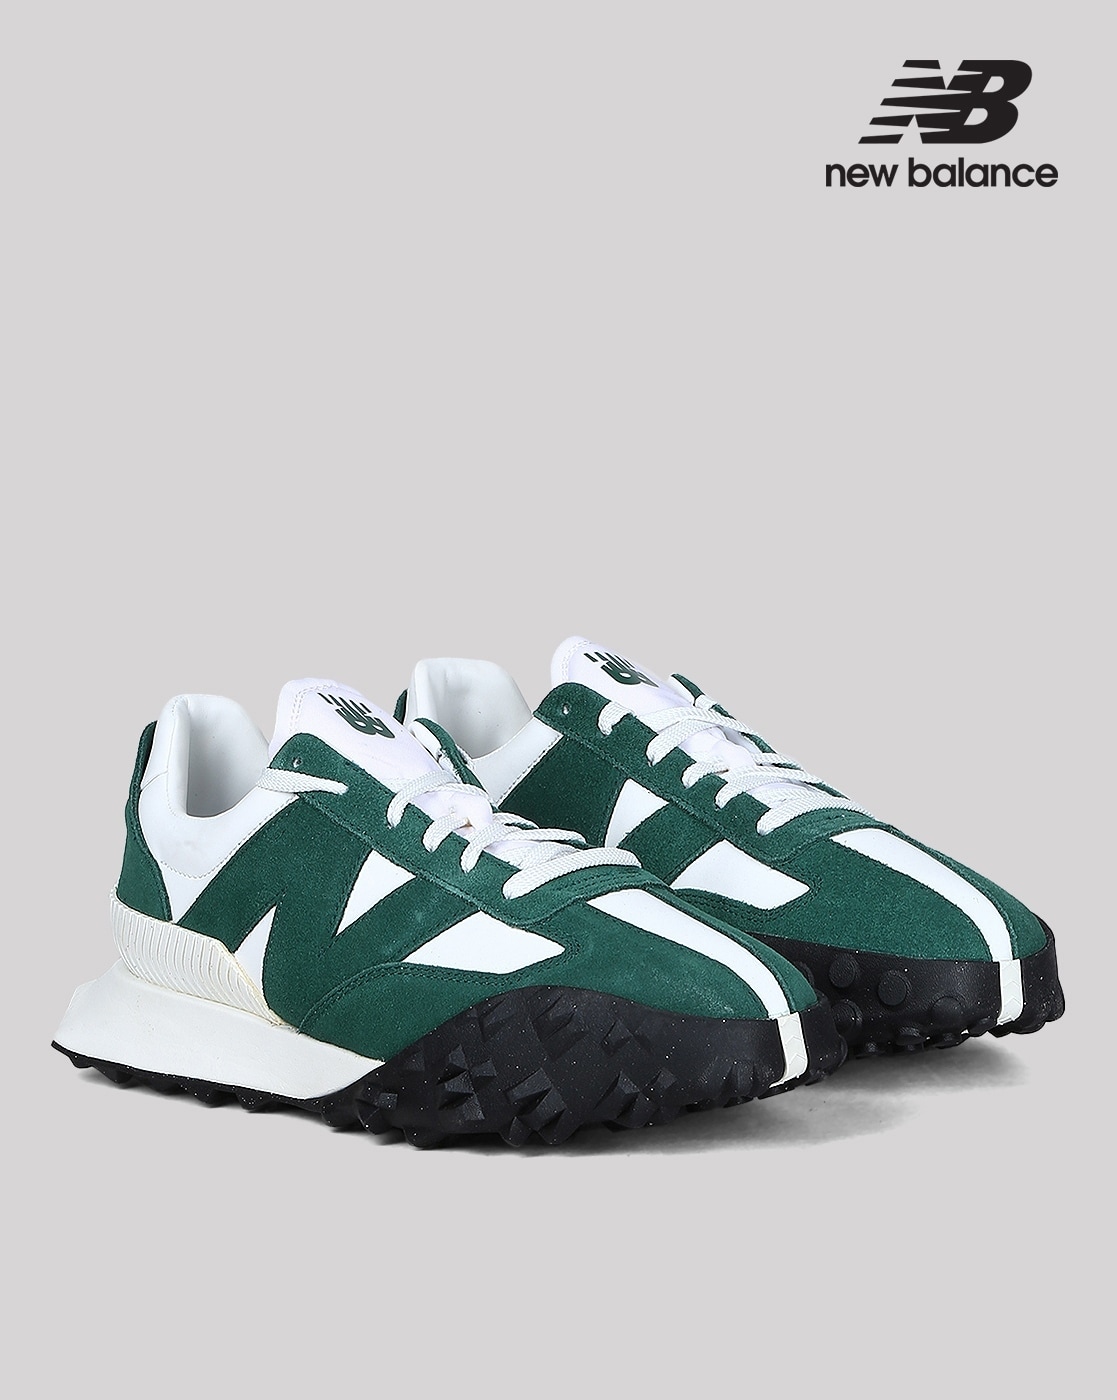 New Balance Archives - Exclusive Sneakers SA